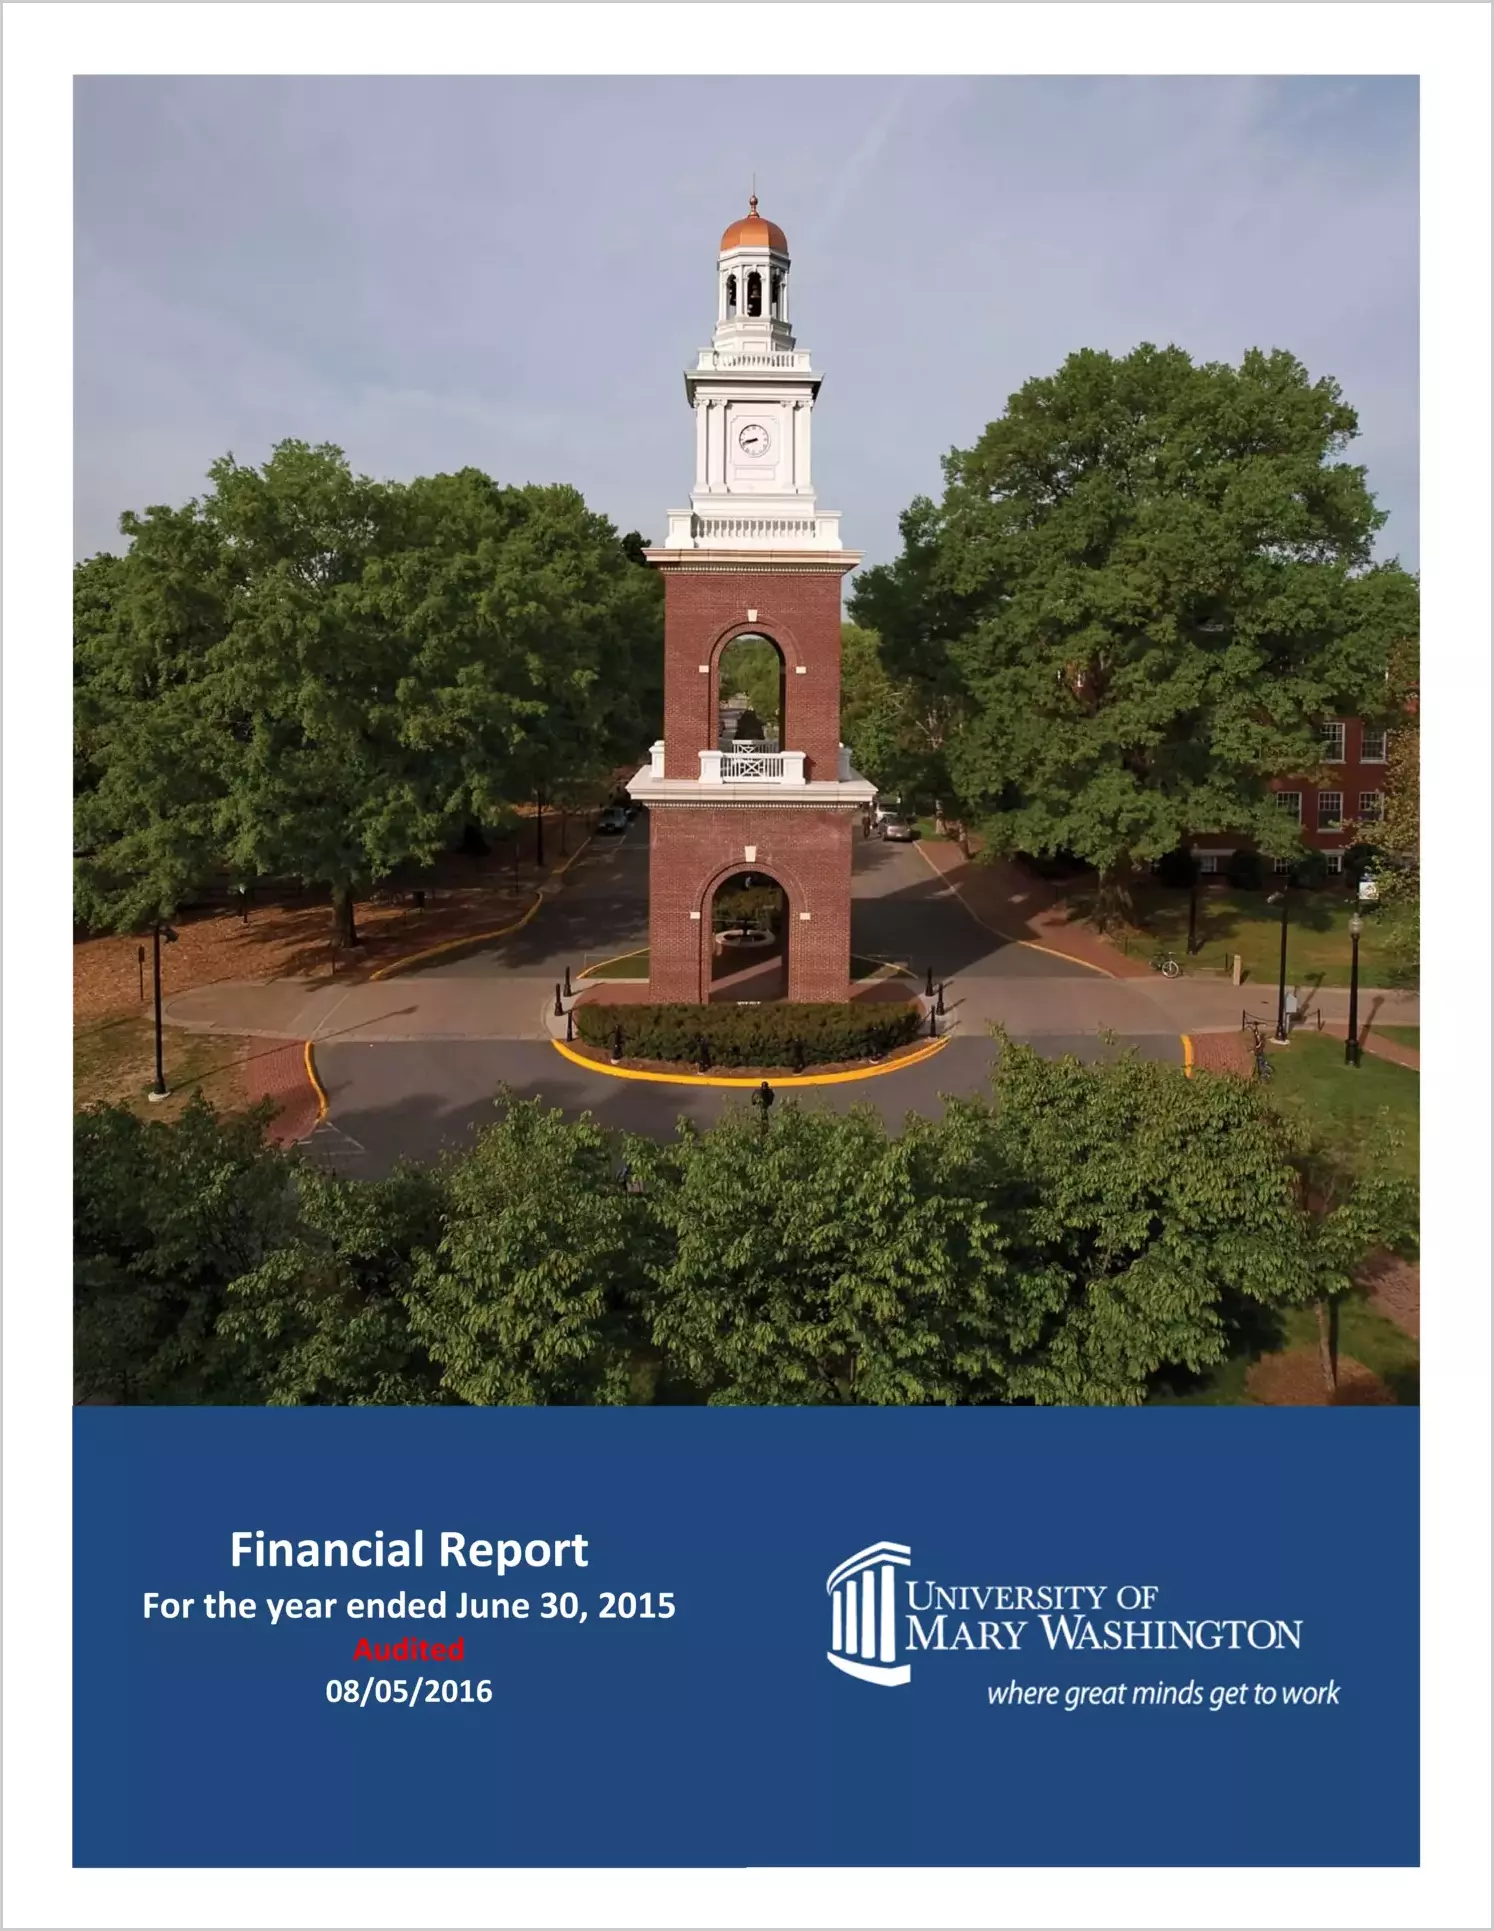 University of Mary Washington Financial Statements for the year ended June 30, 2015